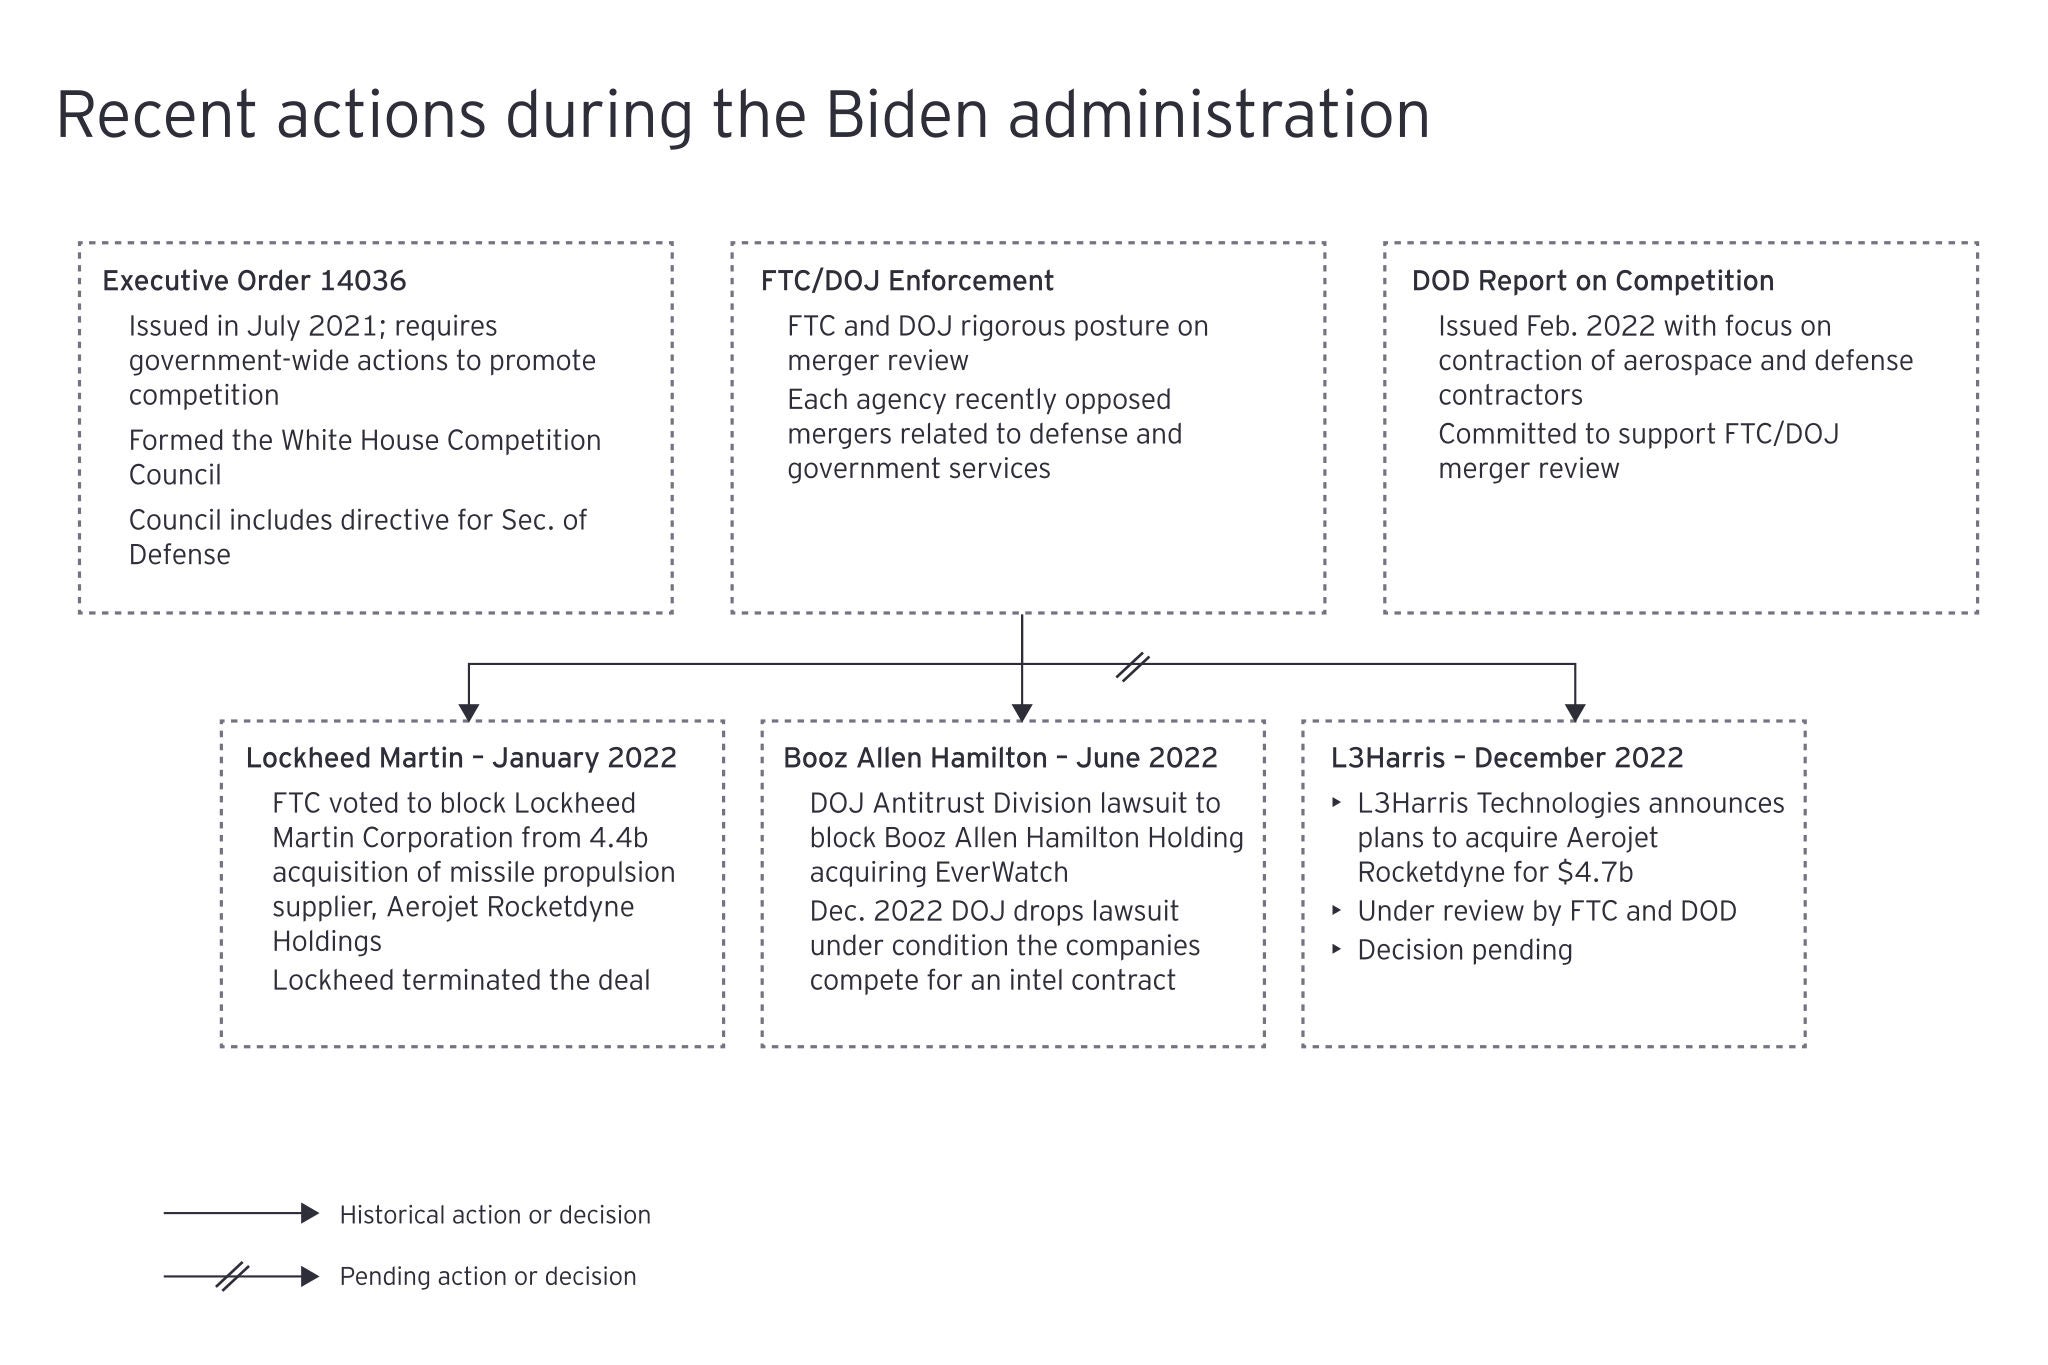 ey recent actions during the biden administration